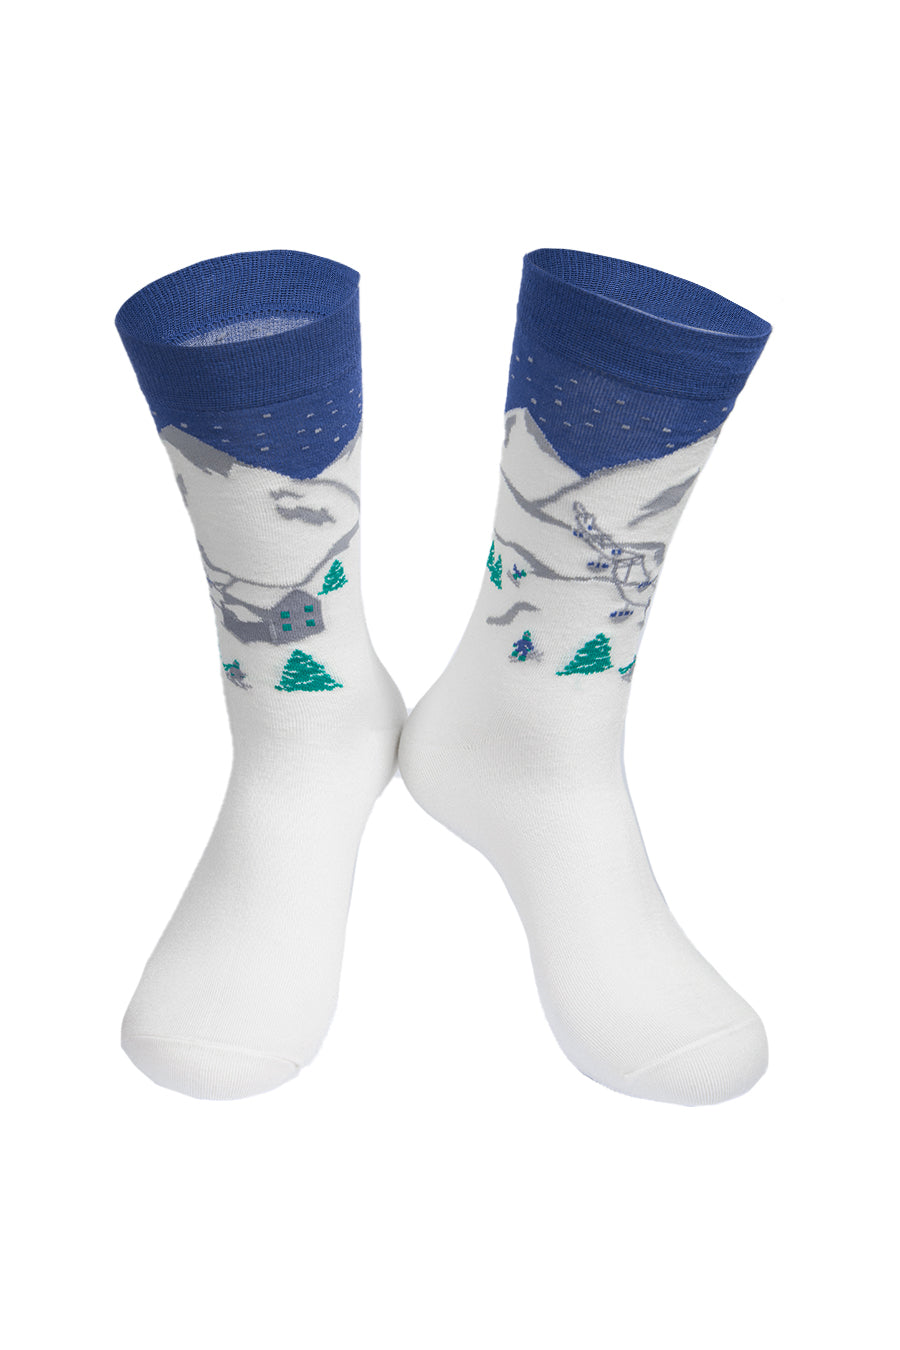 white and blue socks with a scenic pattern featruing a ski hill, snowy mountains and skiers